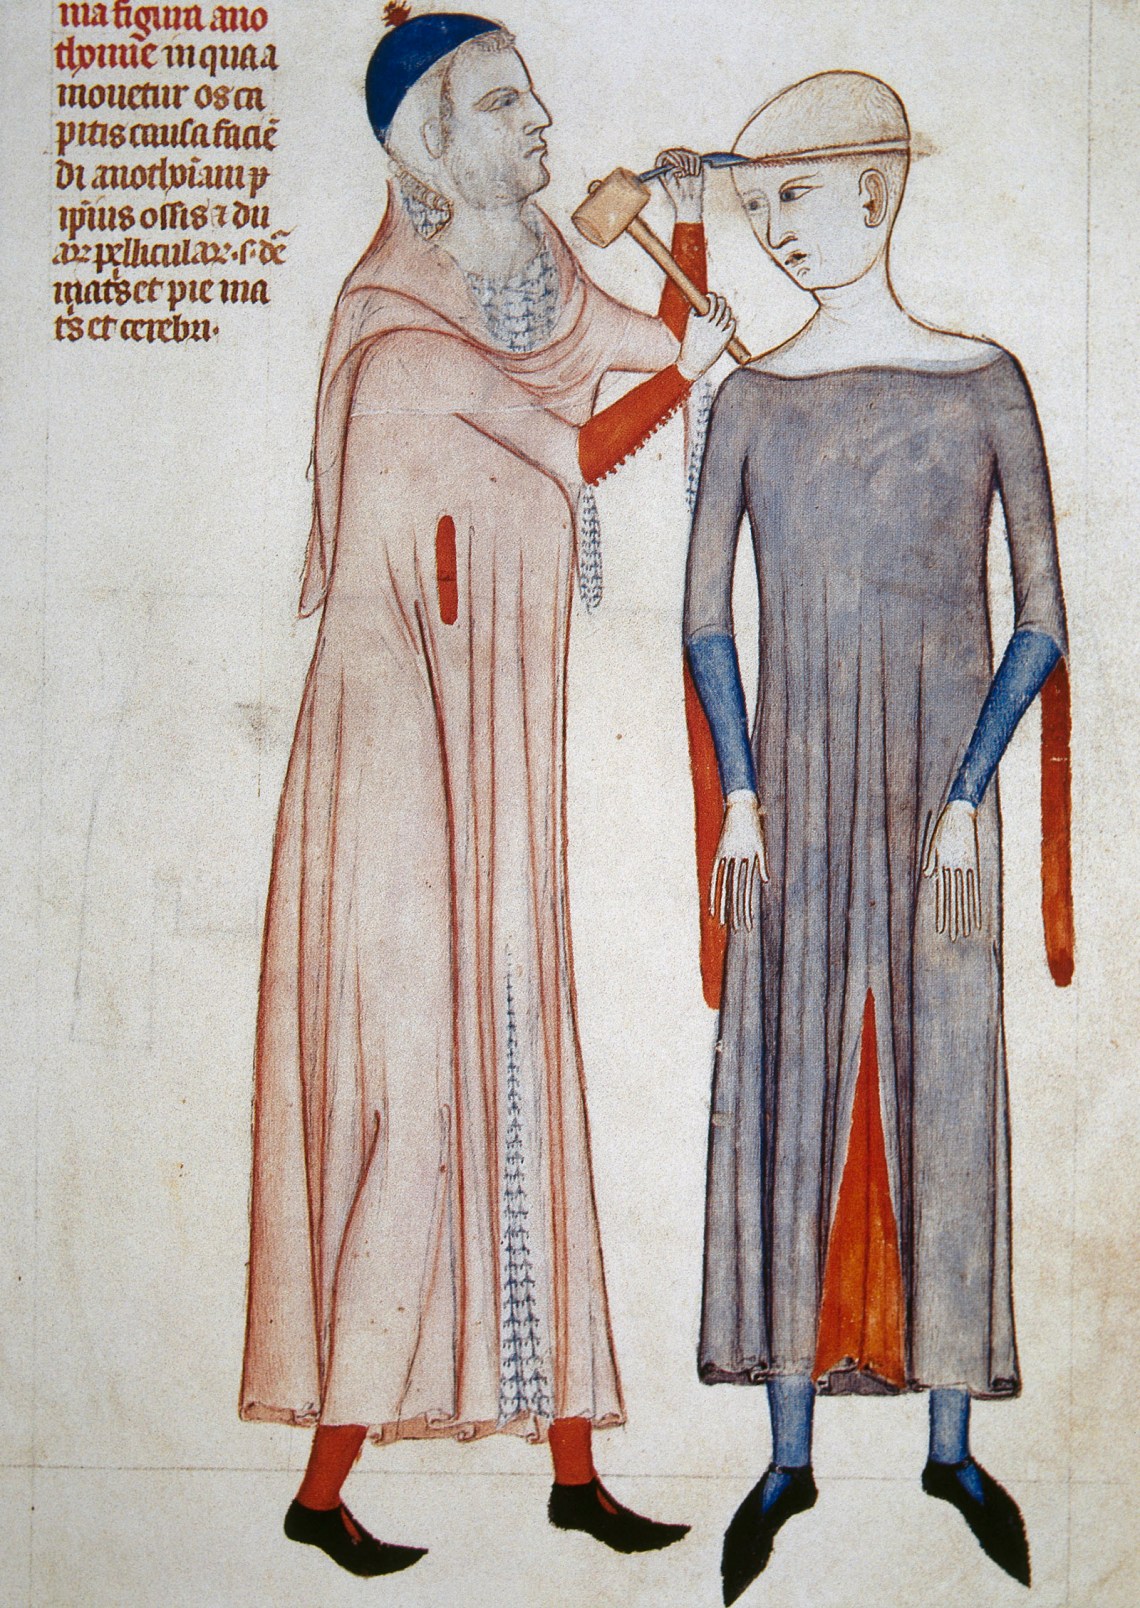 Illustration of trepanning from an anatomical treatise by the Italian physician Guido da Vigevano, 1345